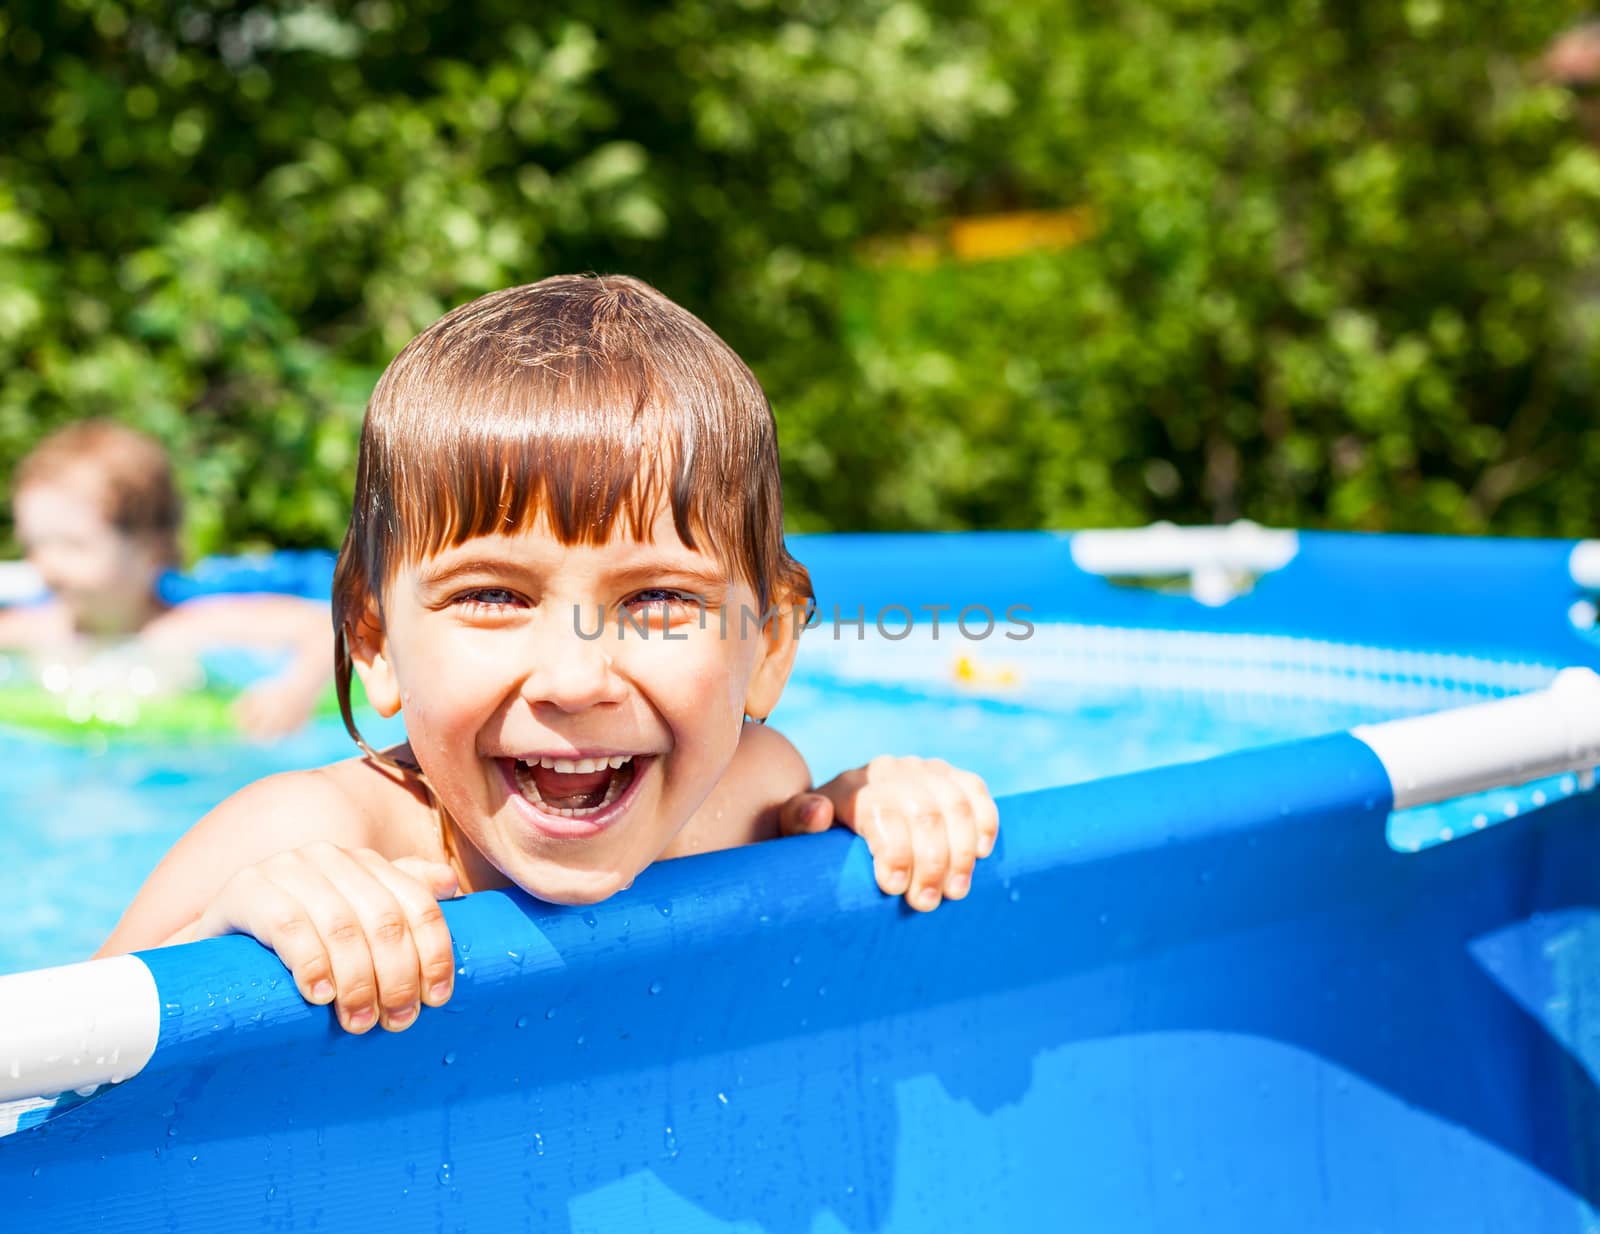 Little girl palying in a swimming pool at a summer garden